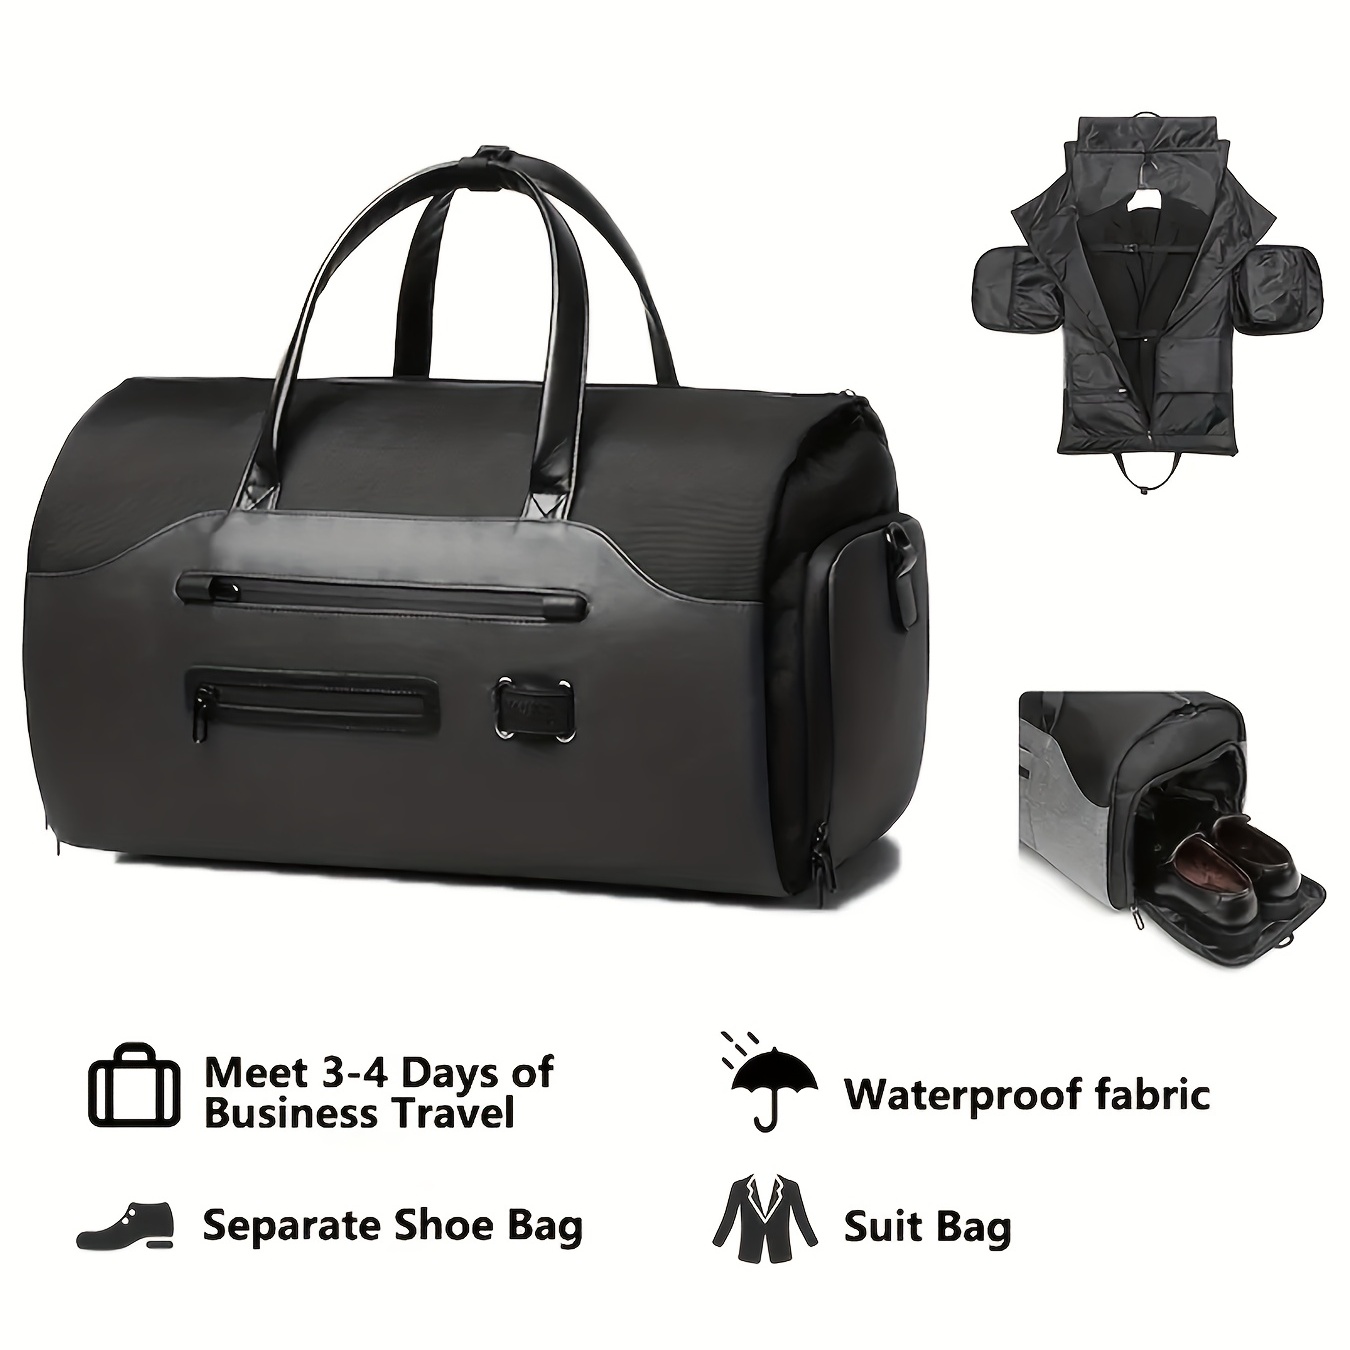 Day 1: Duffle Bags for Men